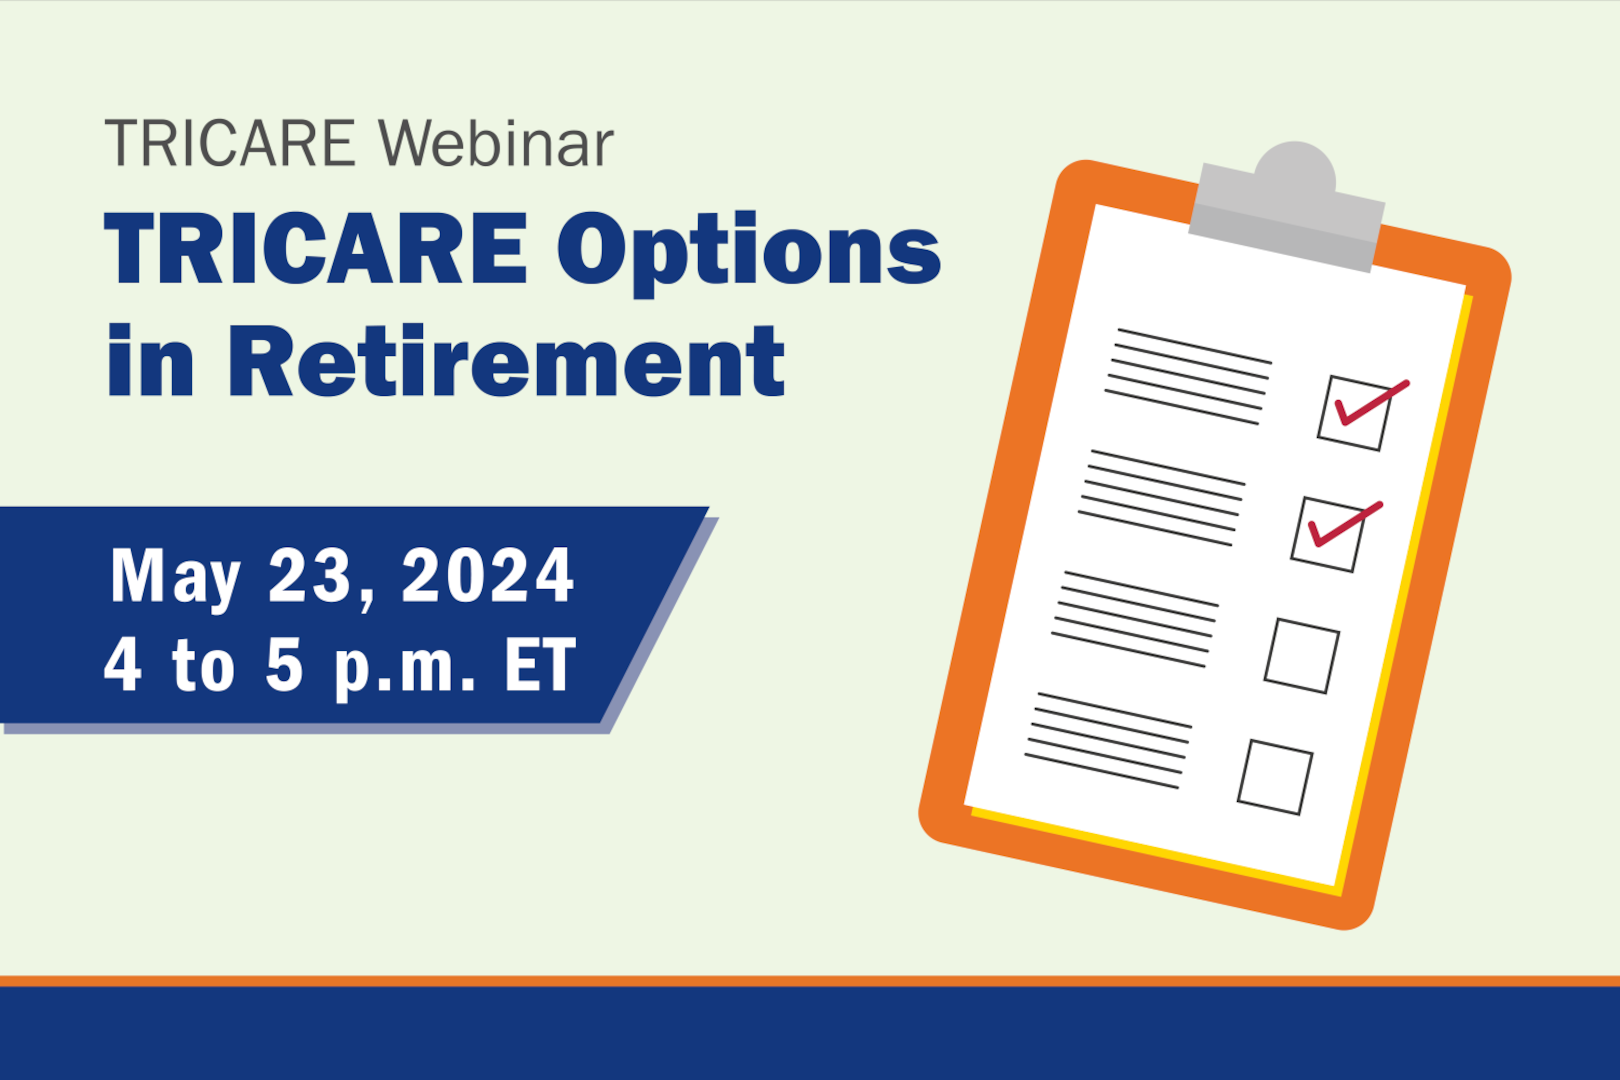 Clip art of clipboard with checklist. Text reads, "TRICARE Webinar: TRICARE Options in Retirement. May 23, 2024, 4 to 5 p.m. ET"